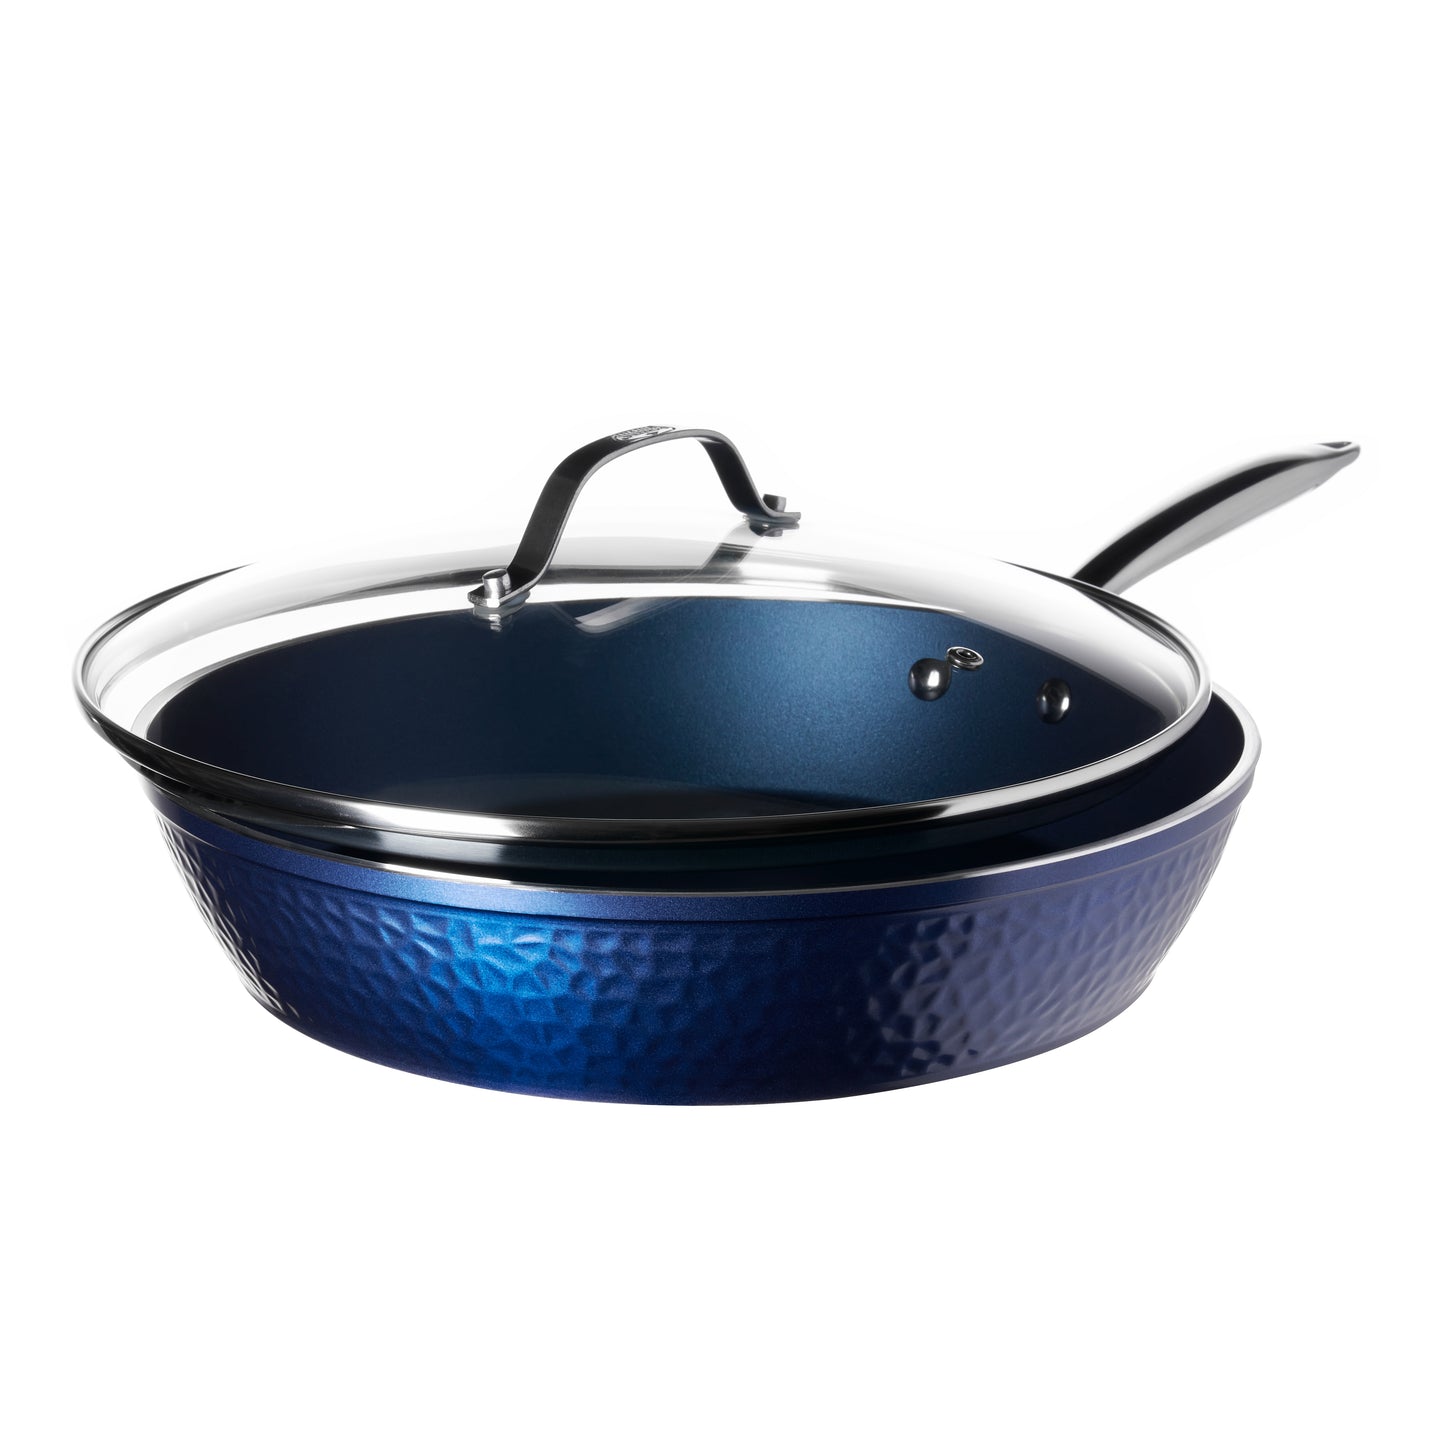 Hammered Sapphire Blue 12" Pan with Glass Lid